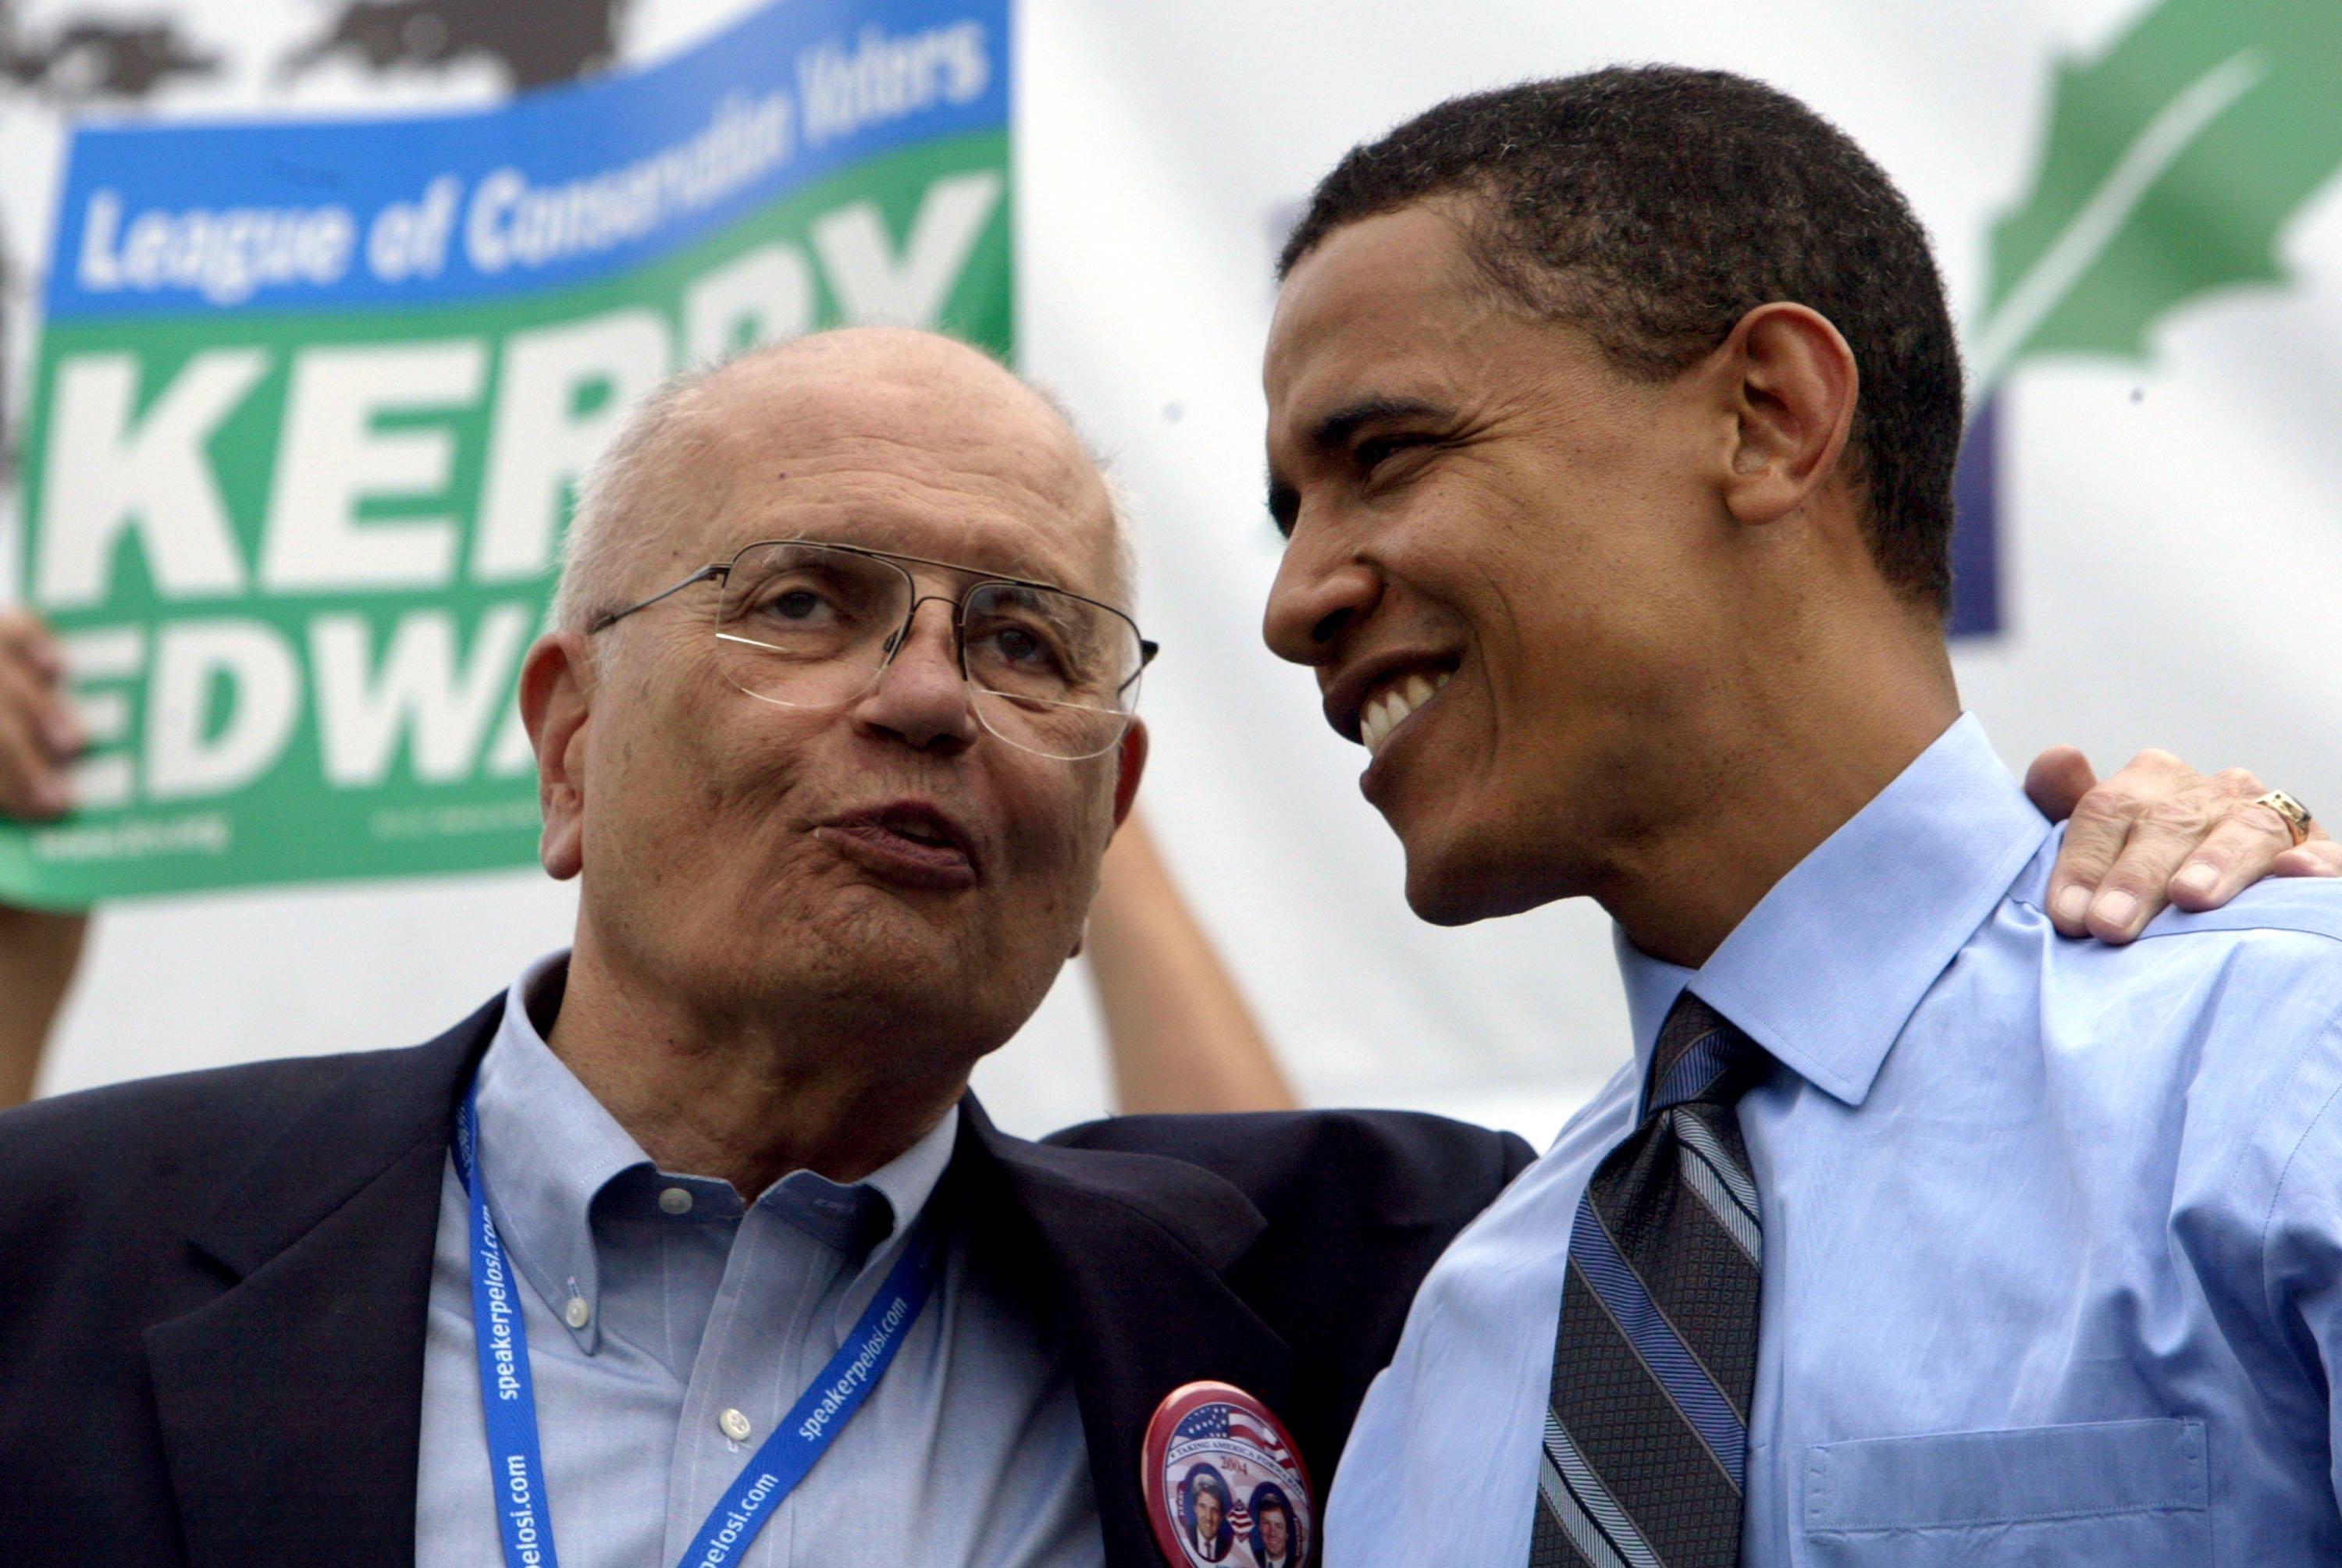 Former President Barack Obama chatting with Rep. John Dingell at the League of Conservation Voters Environmental Victory Rally | Photo: Getty Images 